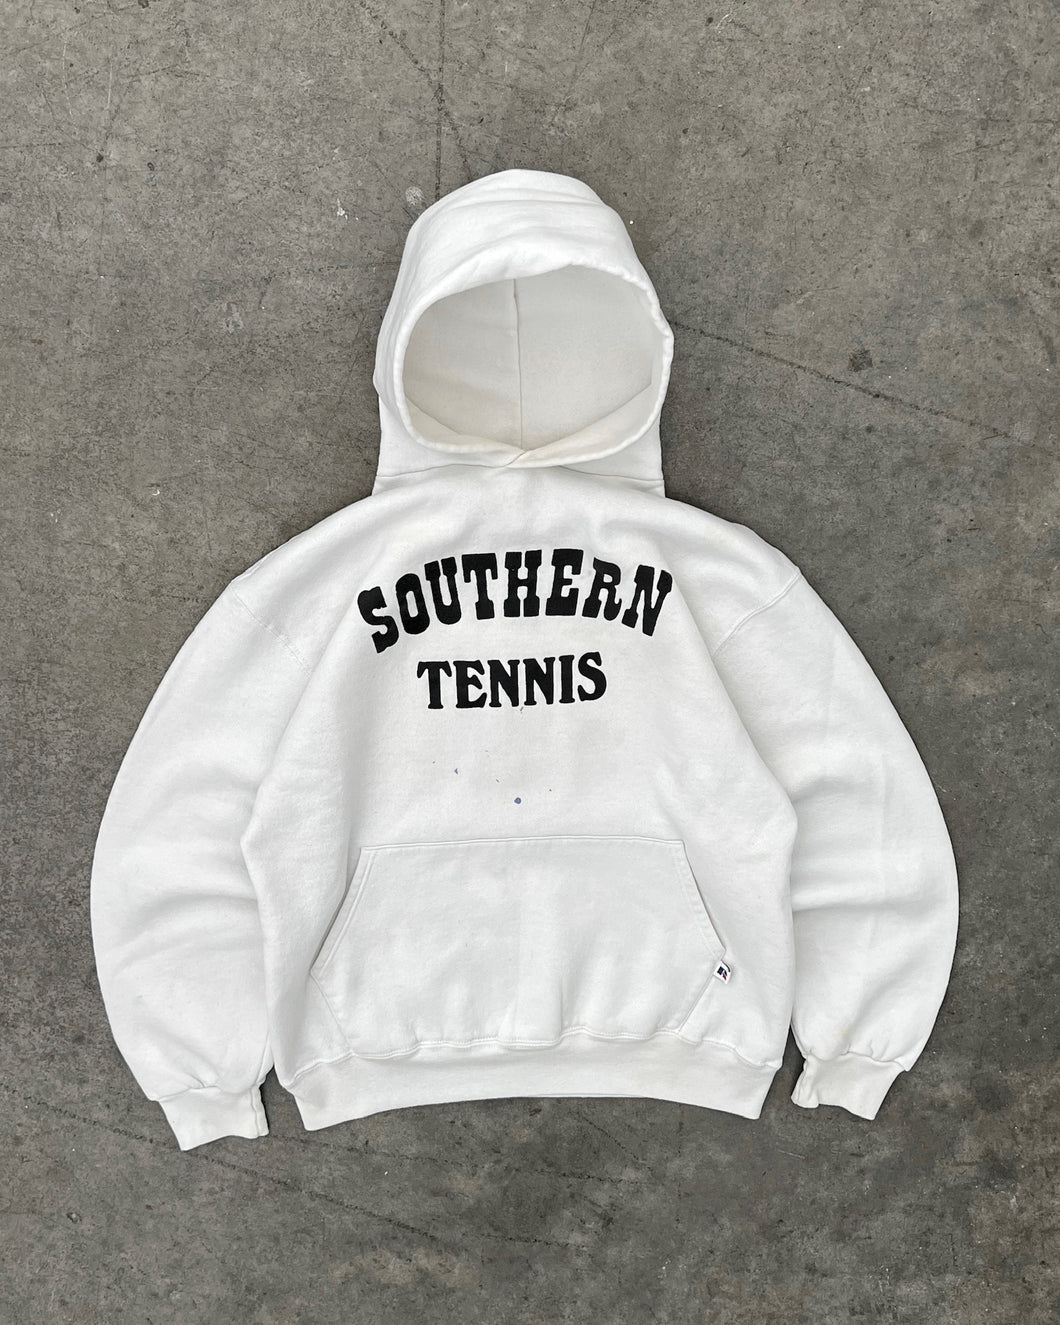 WHITE “SOUTHERN TENNIS” RUSSELL HOODIE - 1990S